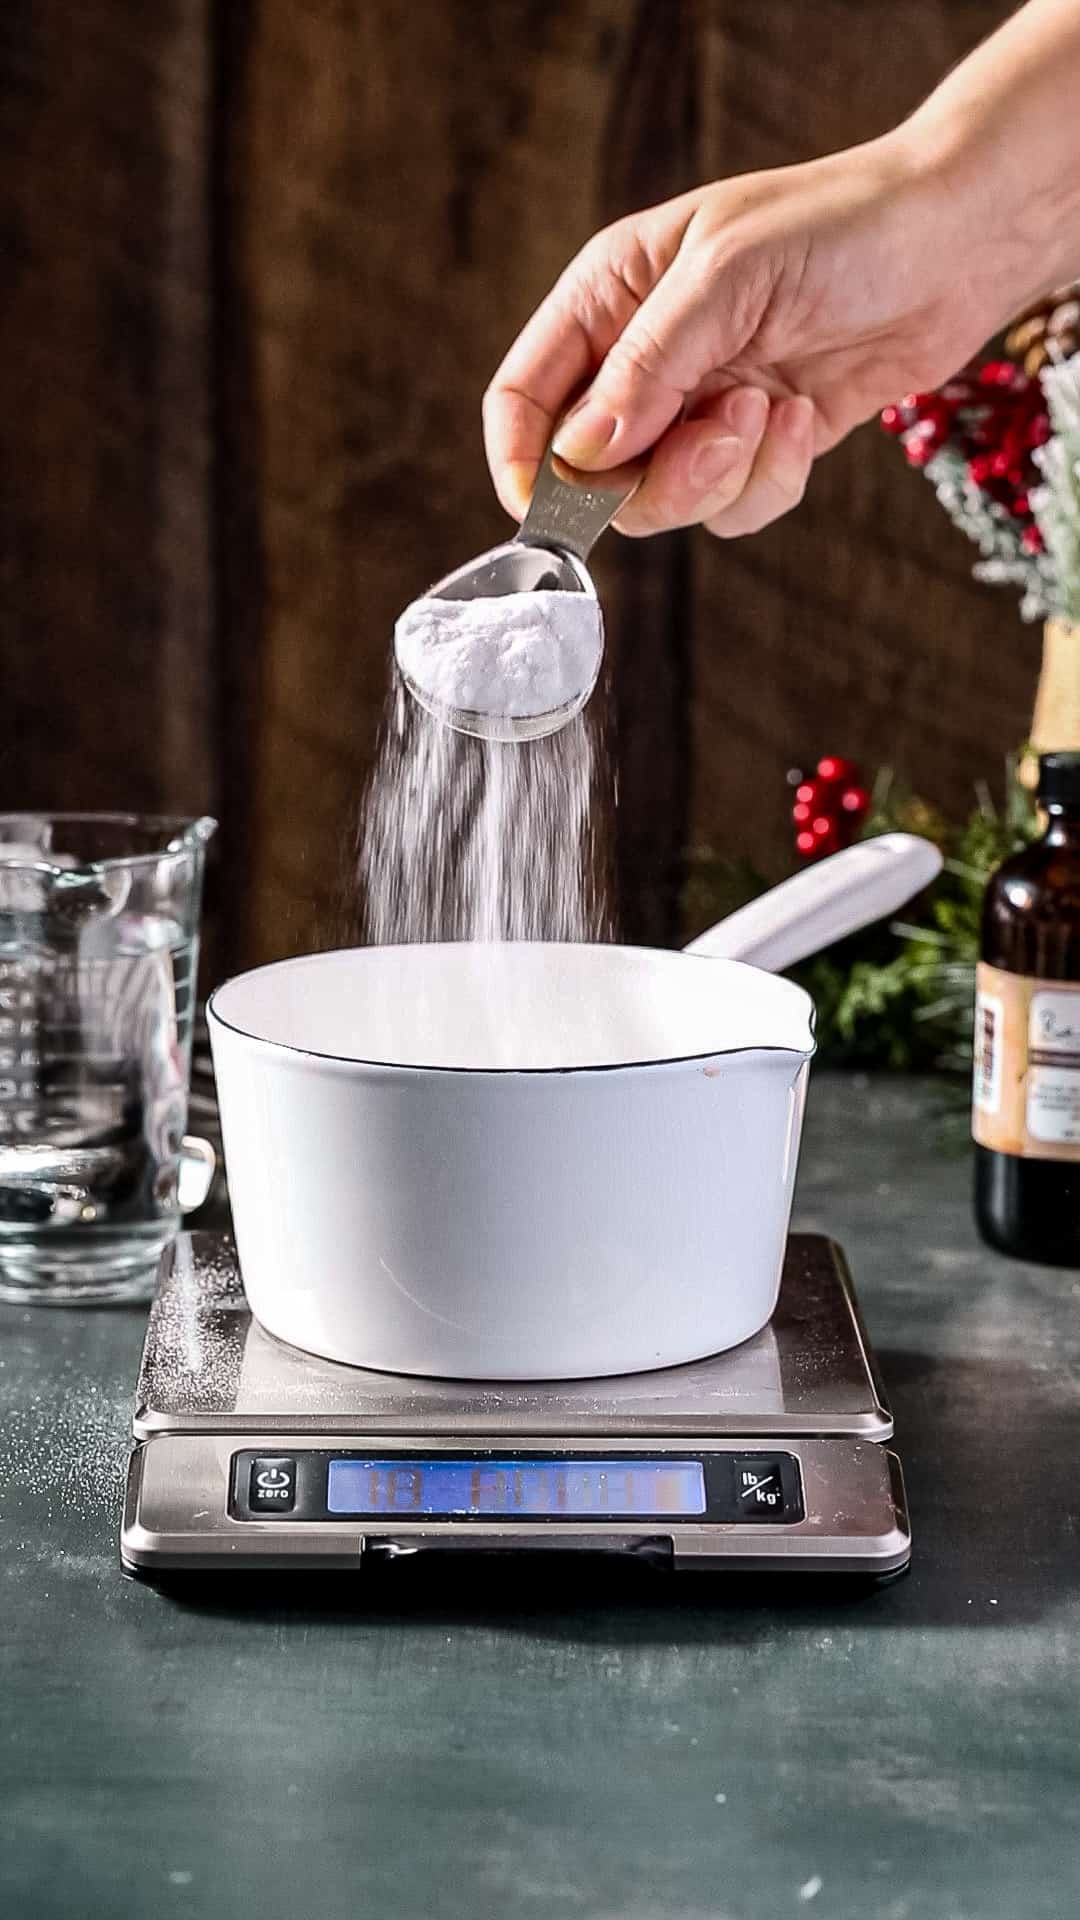 A hand adding sugar to a white pot on a baking scale.